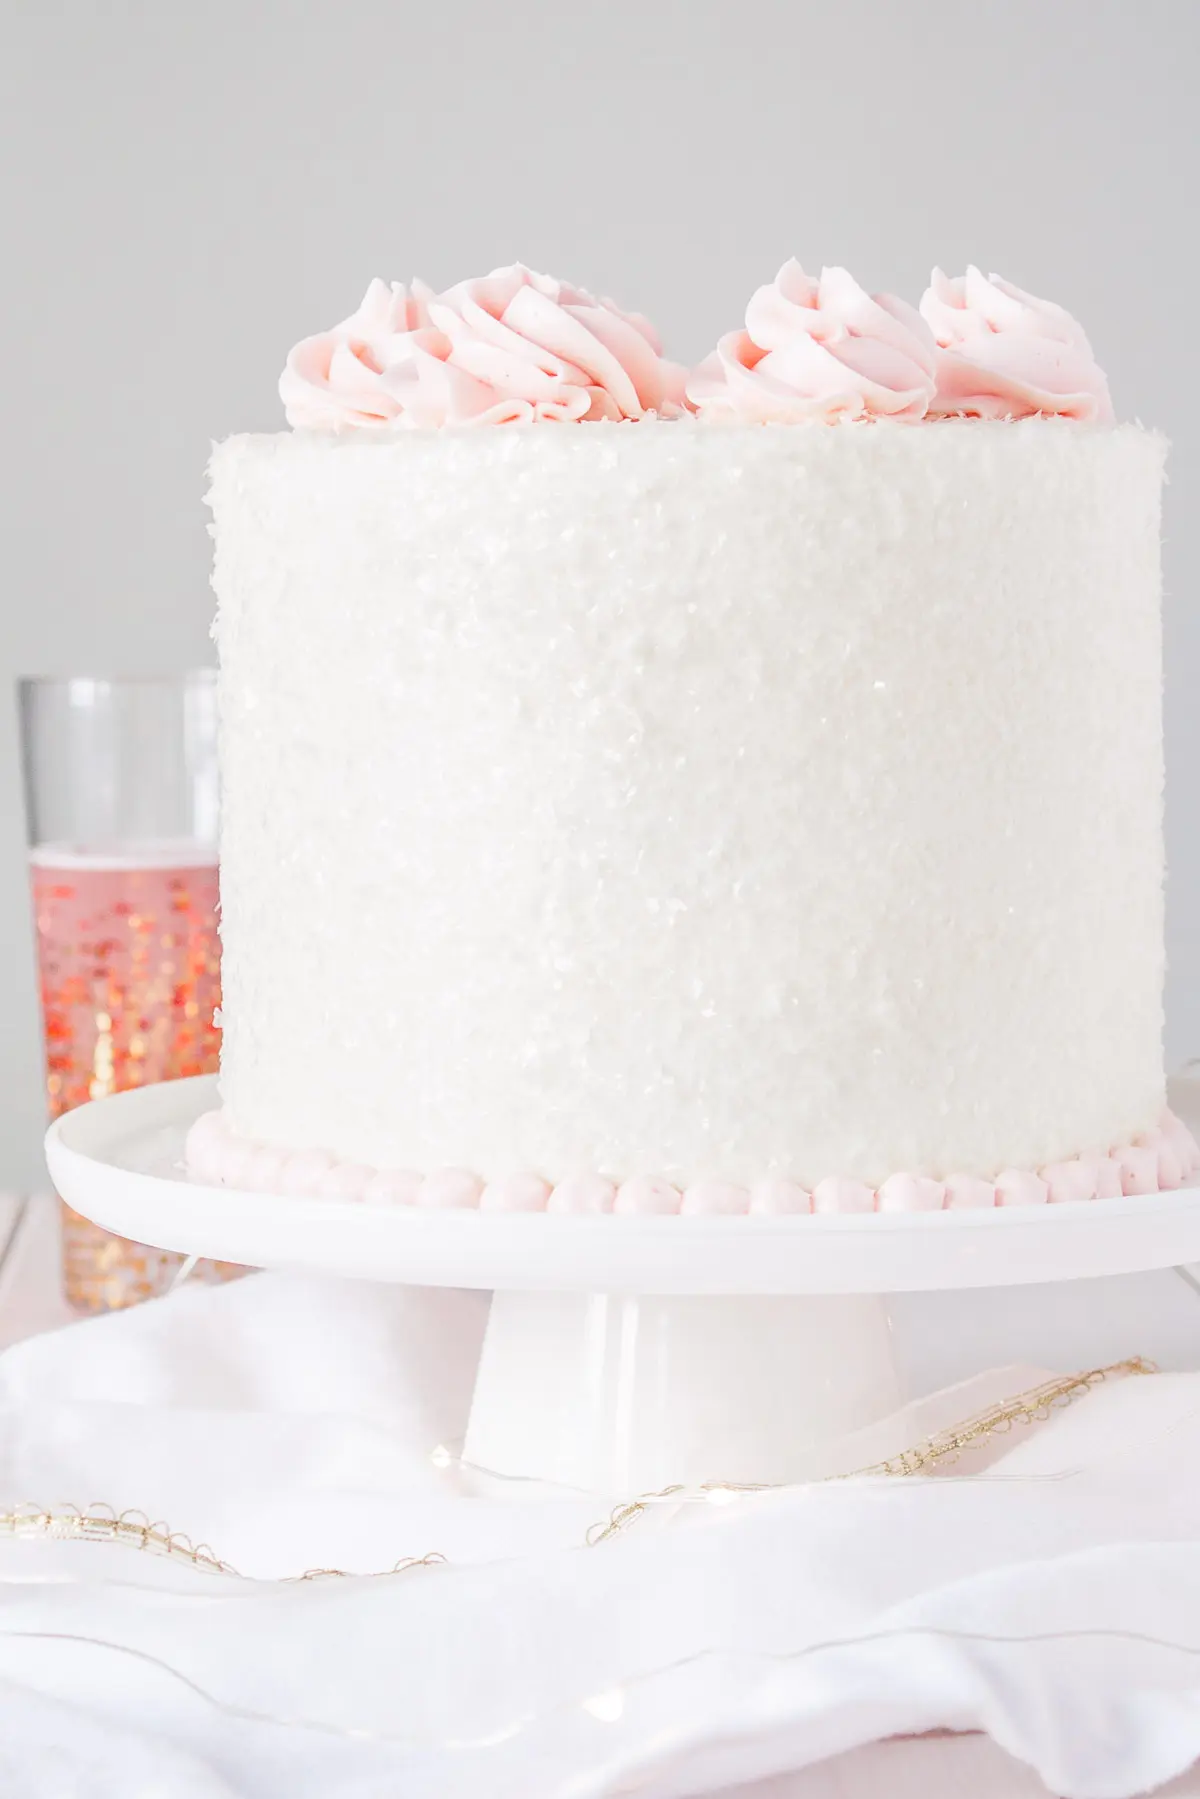 This Pink Champagne Cake is the perfect way to celebrate any occasion or holiday!